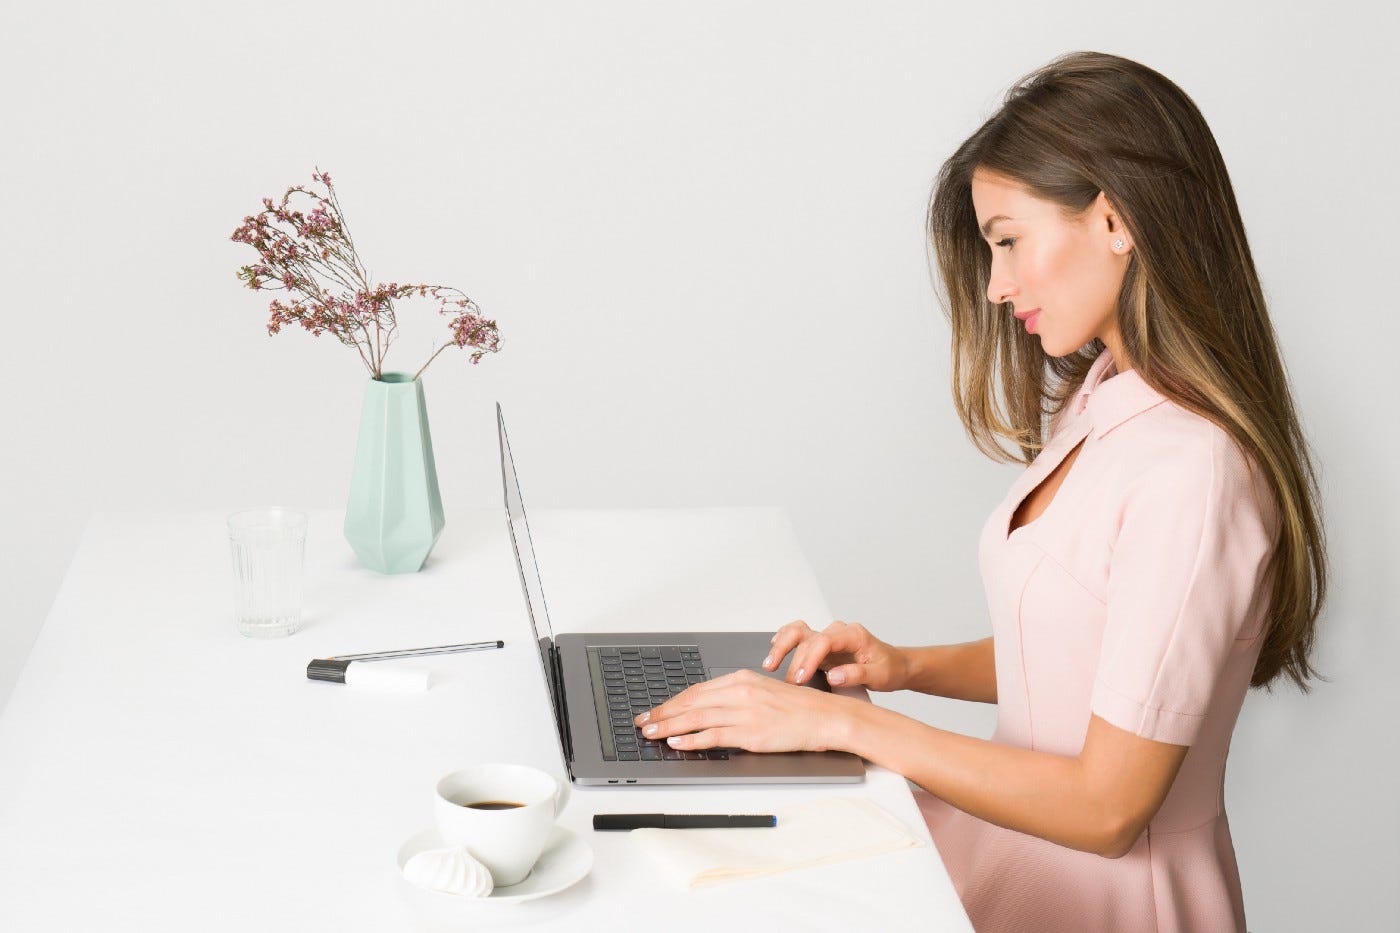 young woman who works as a freelancer schedules a call on her laptop.